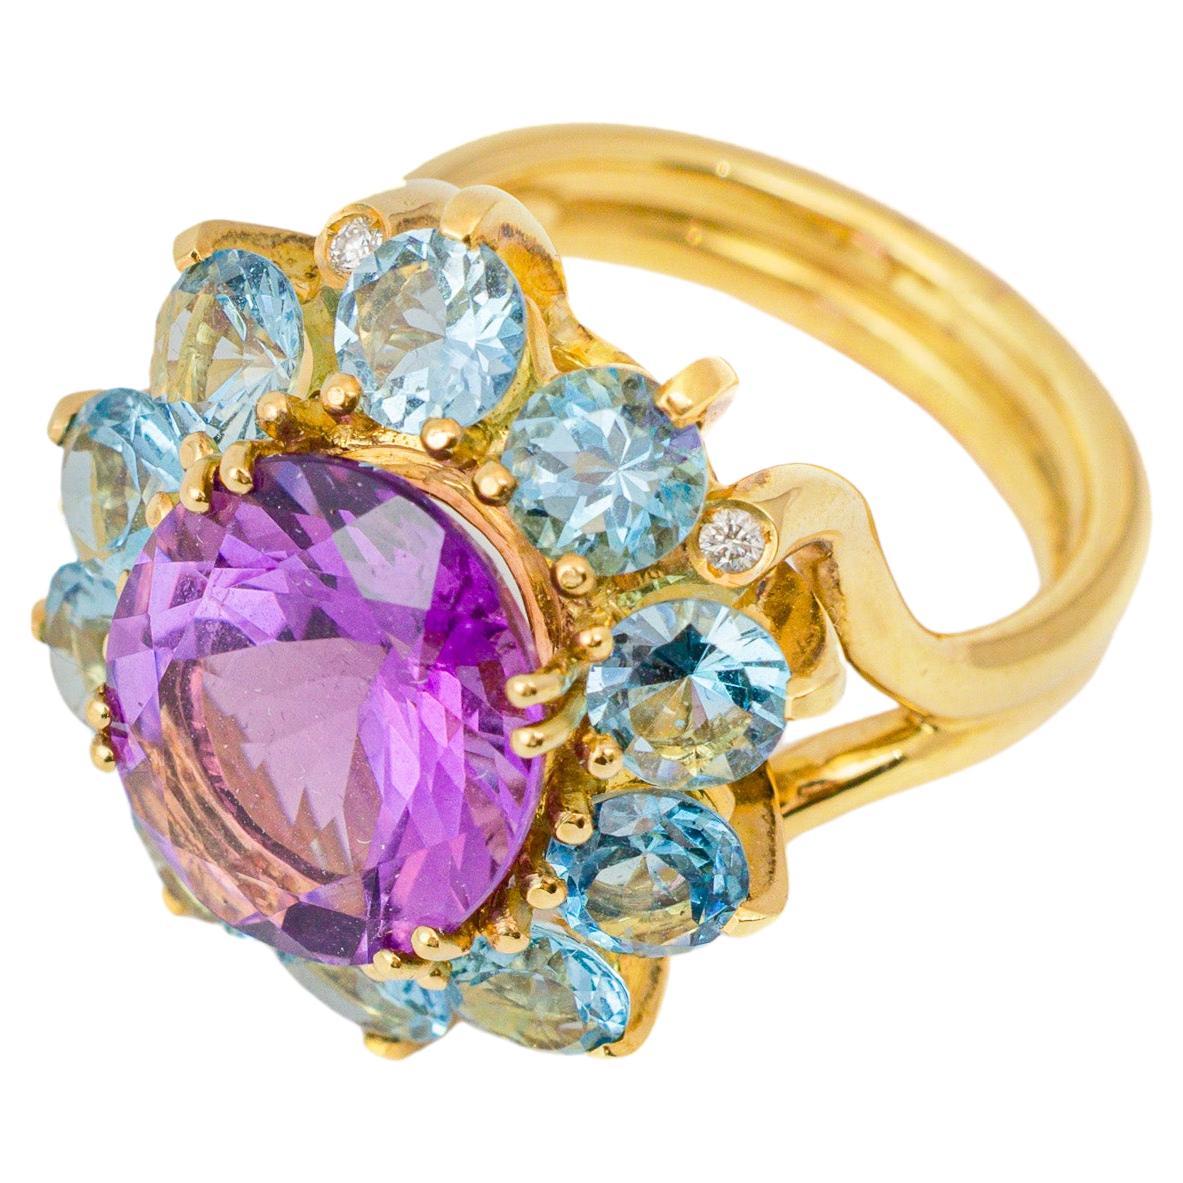 "Costis" Imperial Rosette Ring - Central Amethyst with Aquamarines in 18K Gold